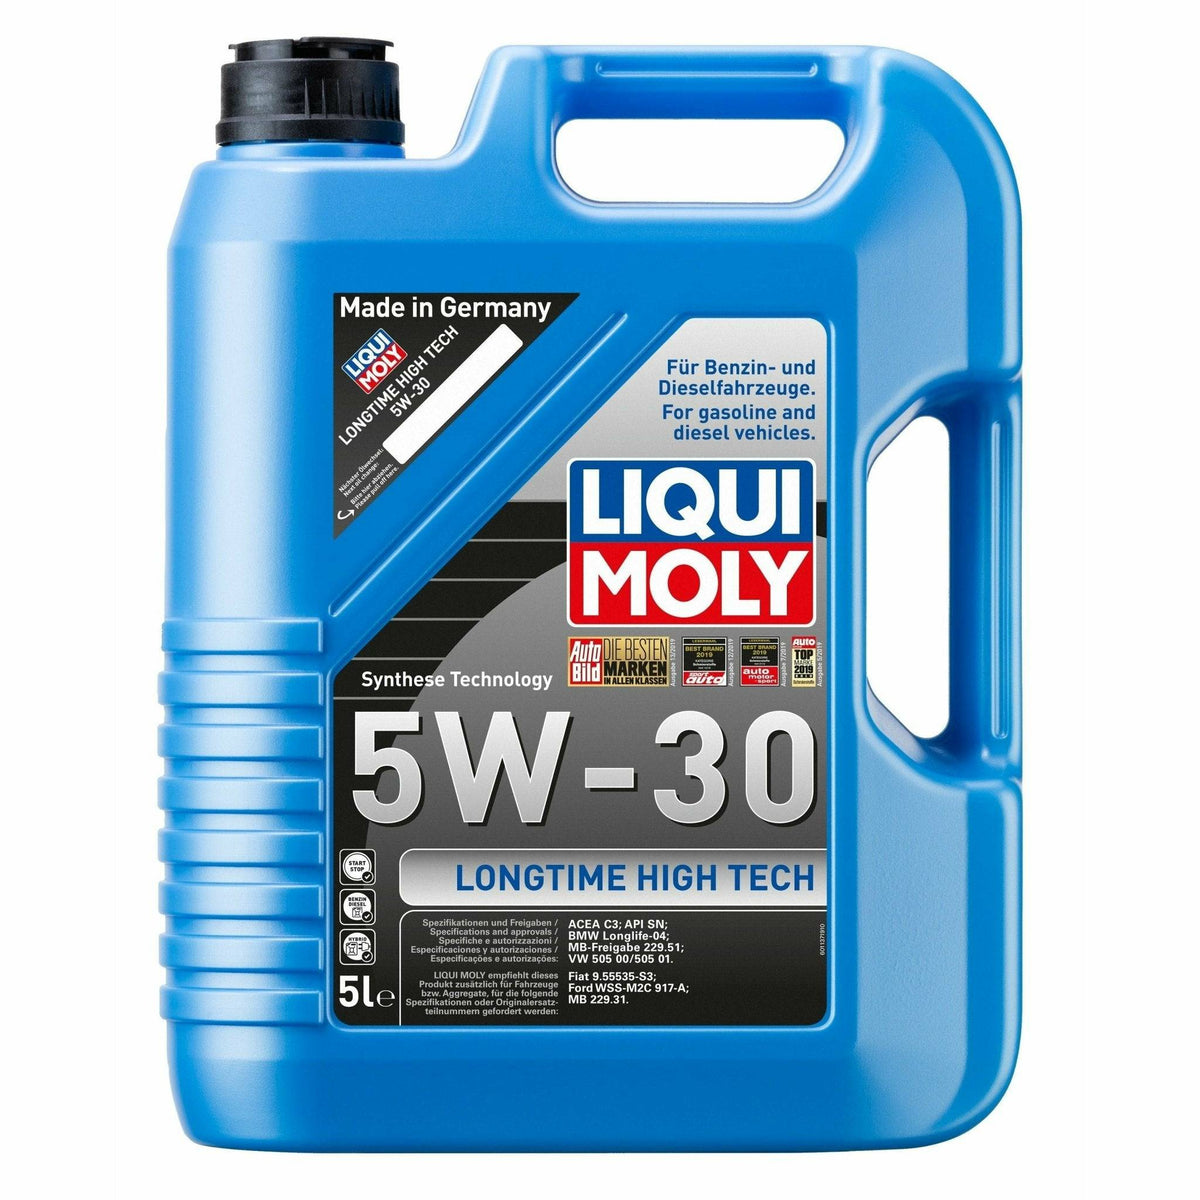 LIQUI MOLY Longtime High Tech 5W-30 Premium Low-Friction Oil 5 Liters 9507  – World of Lubricant